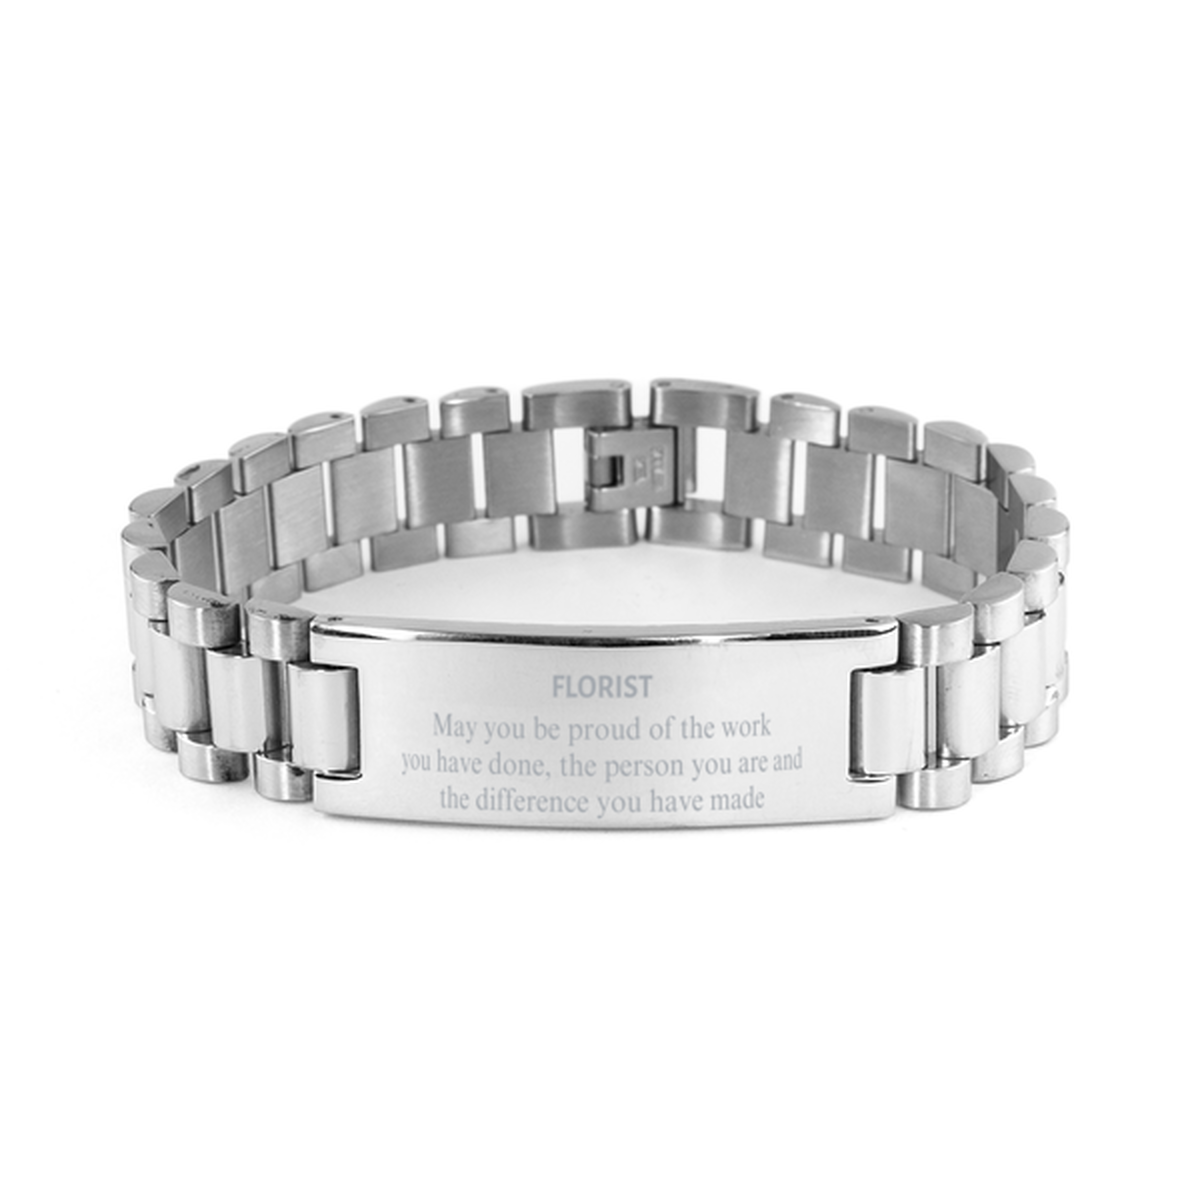 Florist May you be proud of the work you have done, Retirement Florist Ladder Stainless Steel Bracelet for Colleague Appreciation Gifts Amazing for Florist